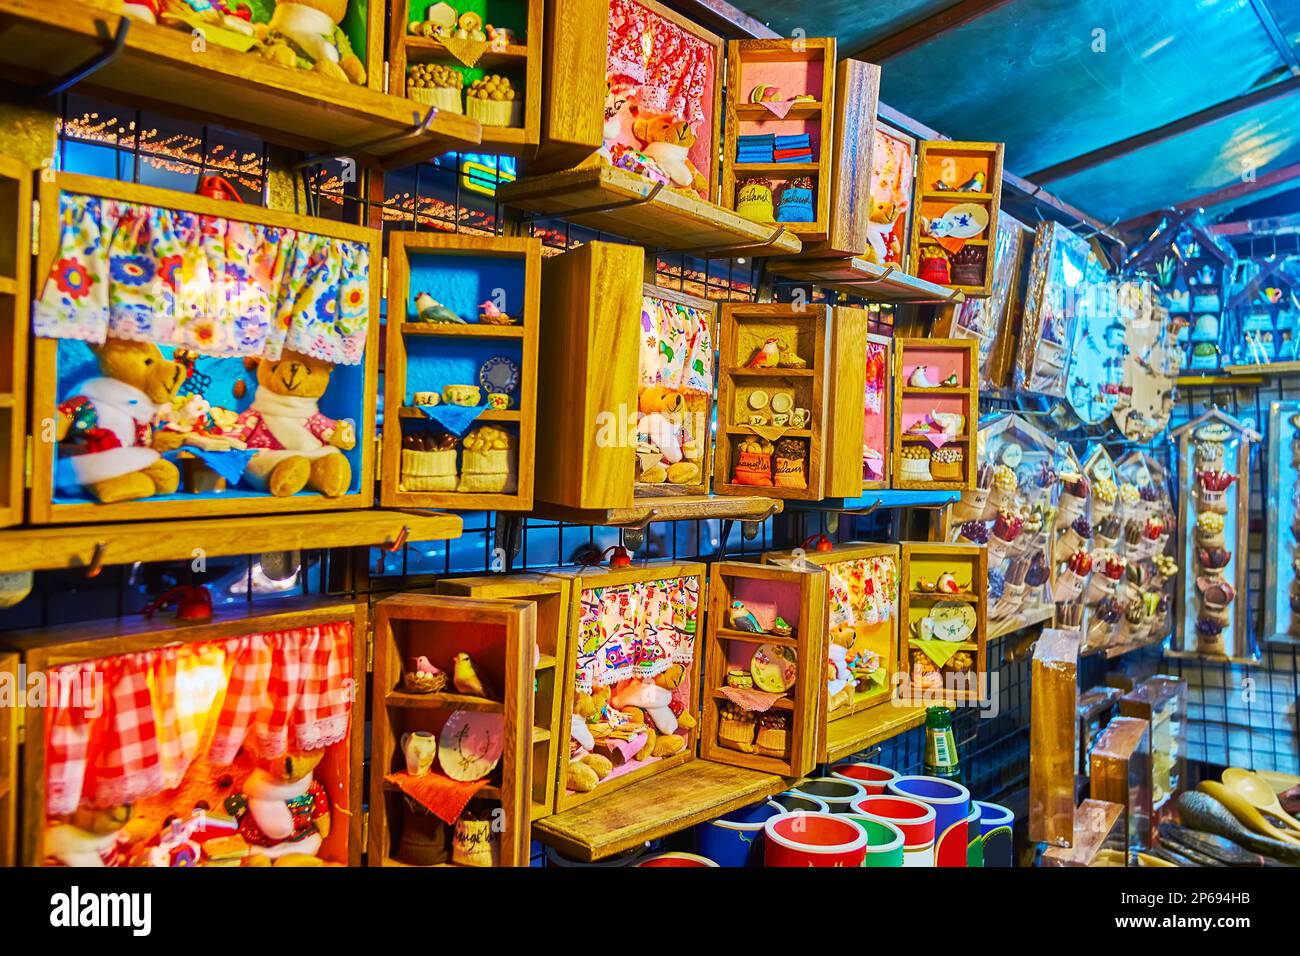 CHIANG MAI, THAILAND - MAY 3, 2019: The Night Market stall with handmade kitchen decors with Teddy Bears in a toy room, on May 3 in Chiang Mai Stock Photo